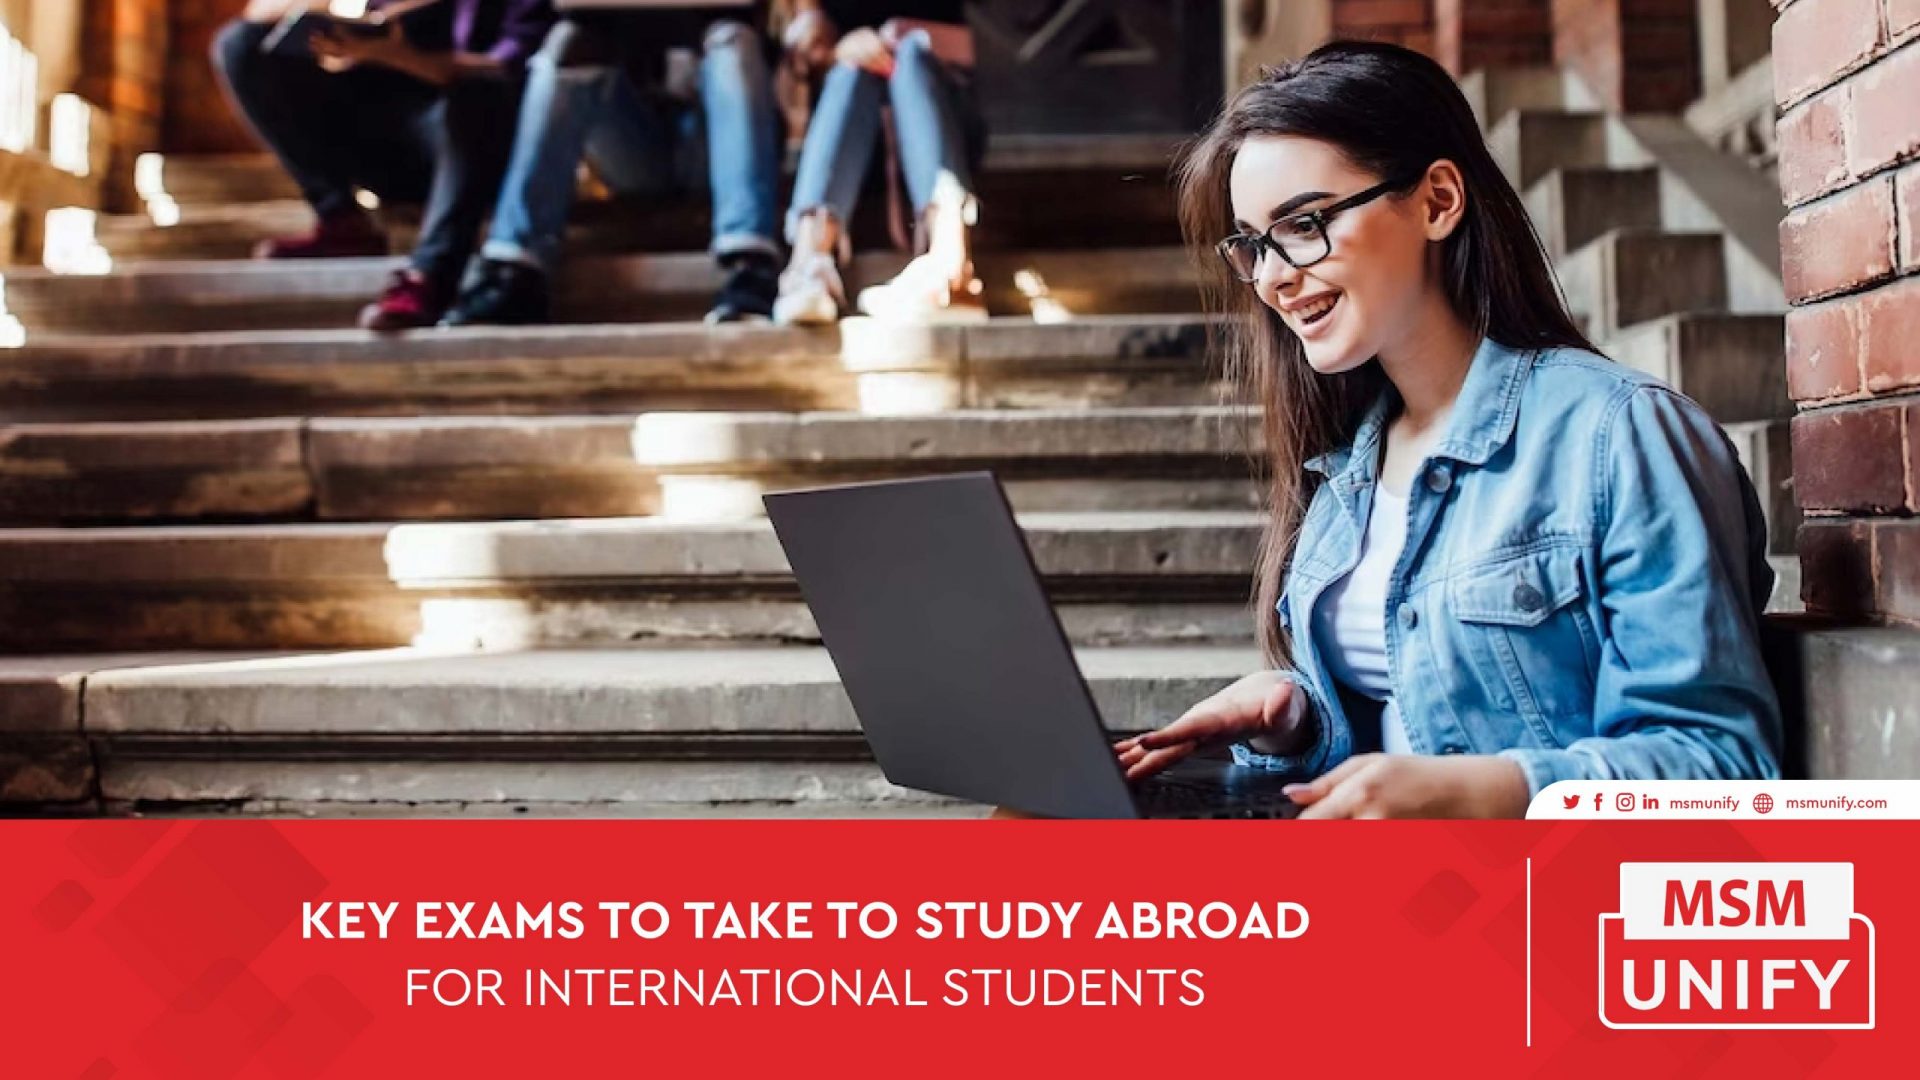 Key exams to take to study abroad for international students